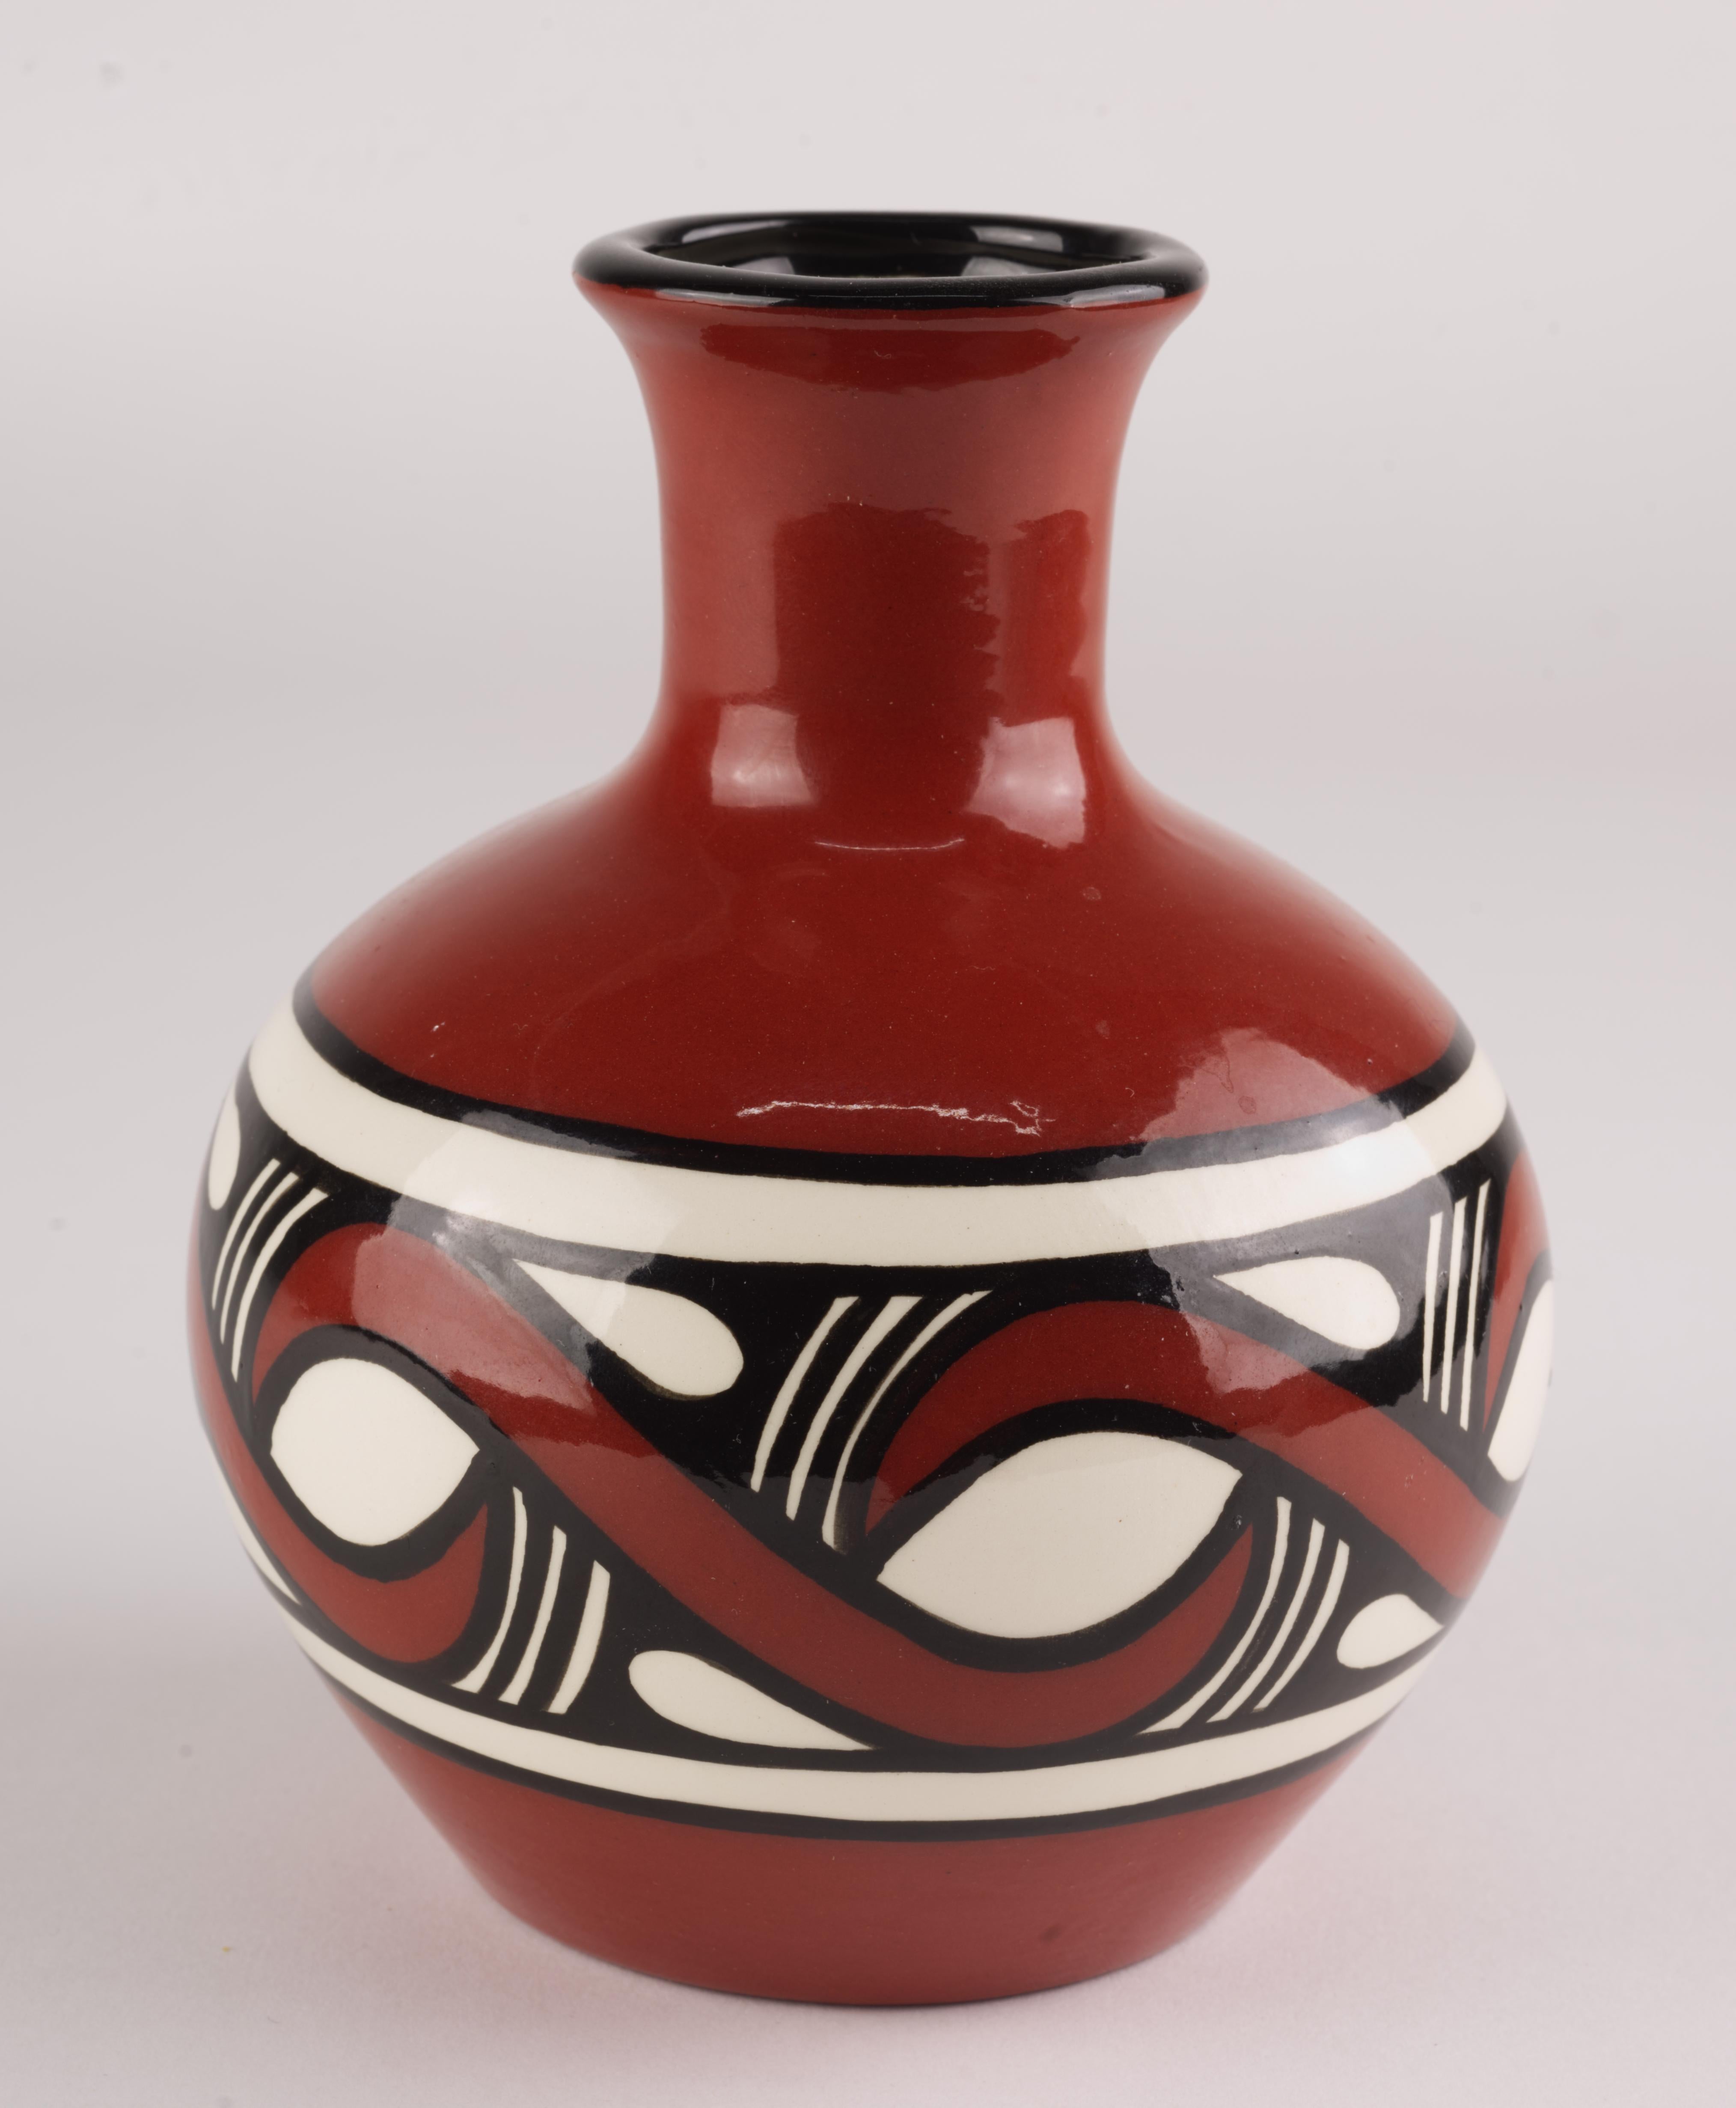  Dyce Ukrainian ceramic handmade bud vase is decorated with Trypillian design in black and white on red clay background. 

The term 